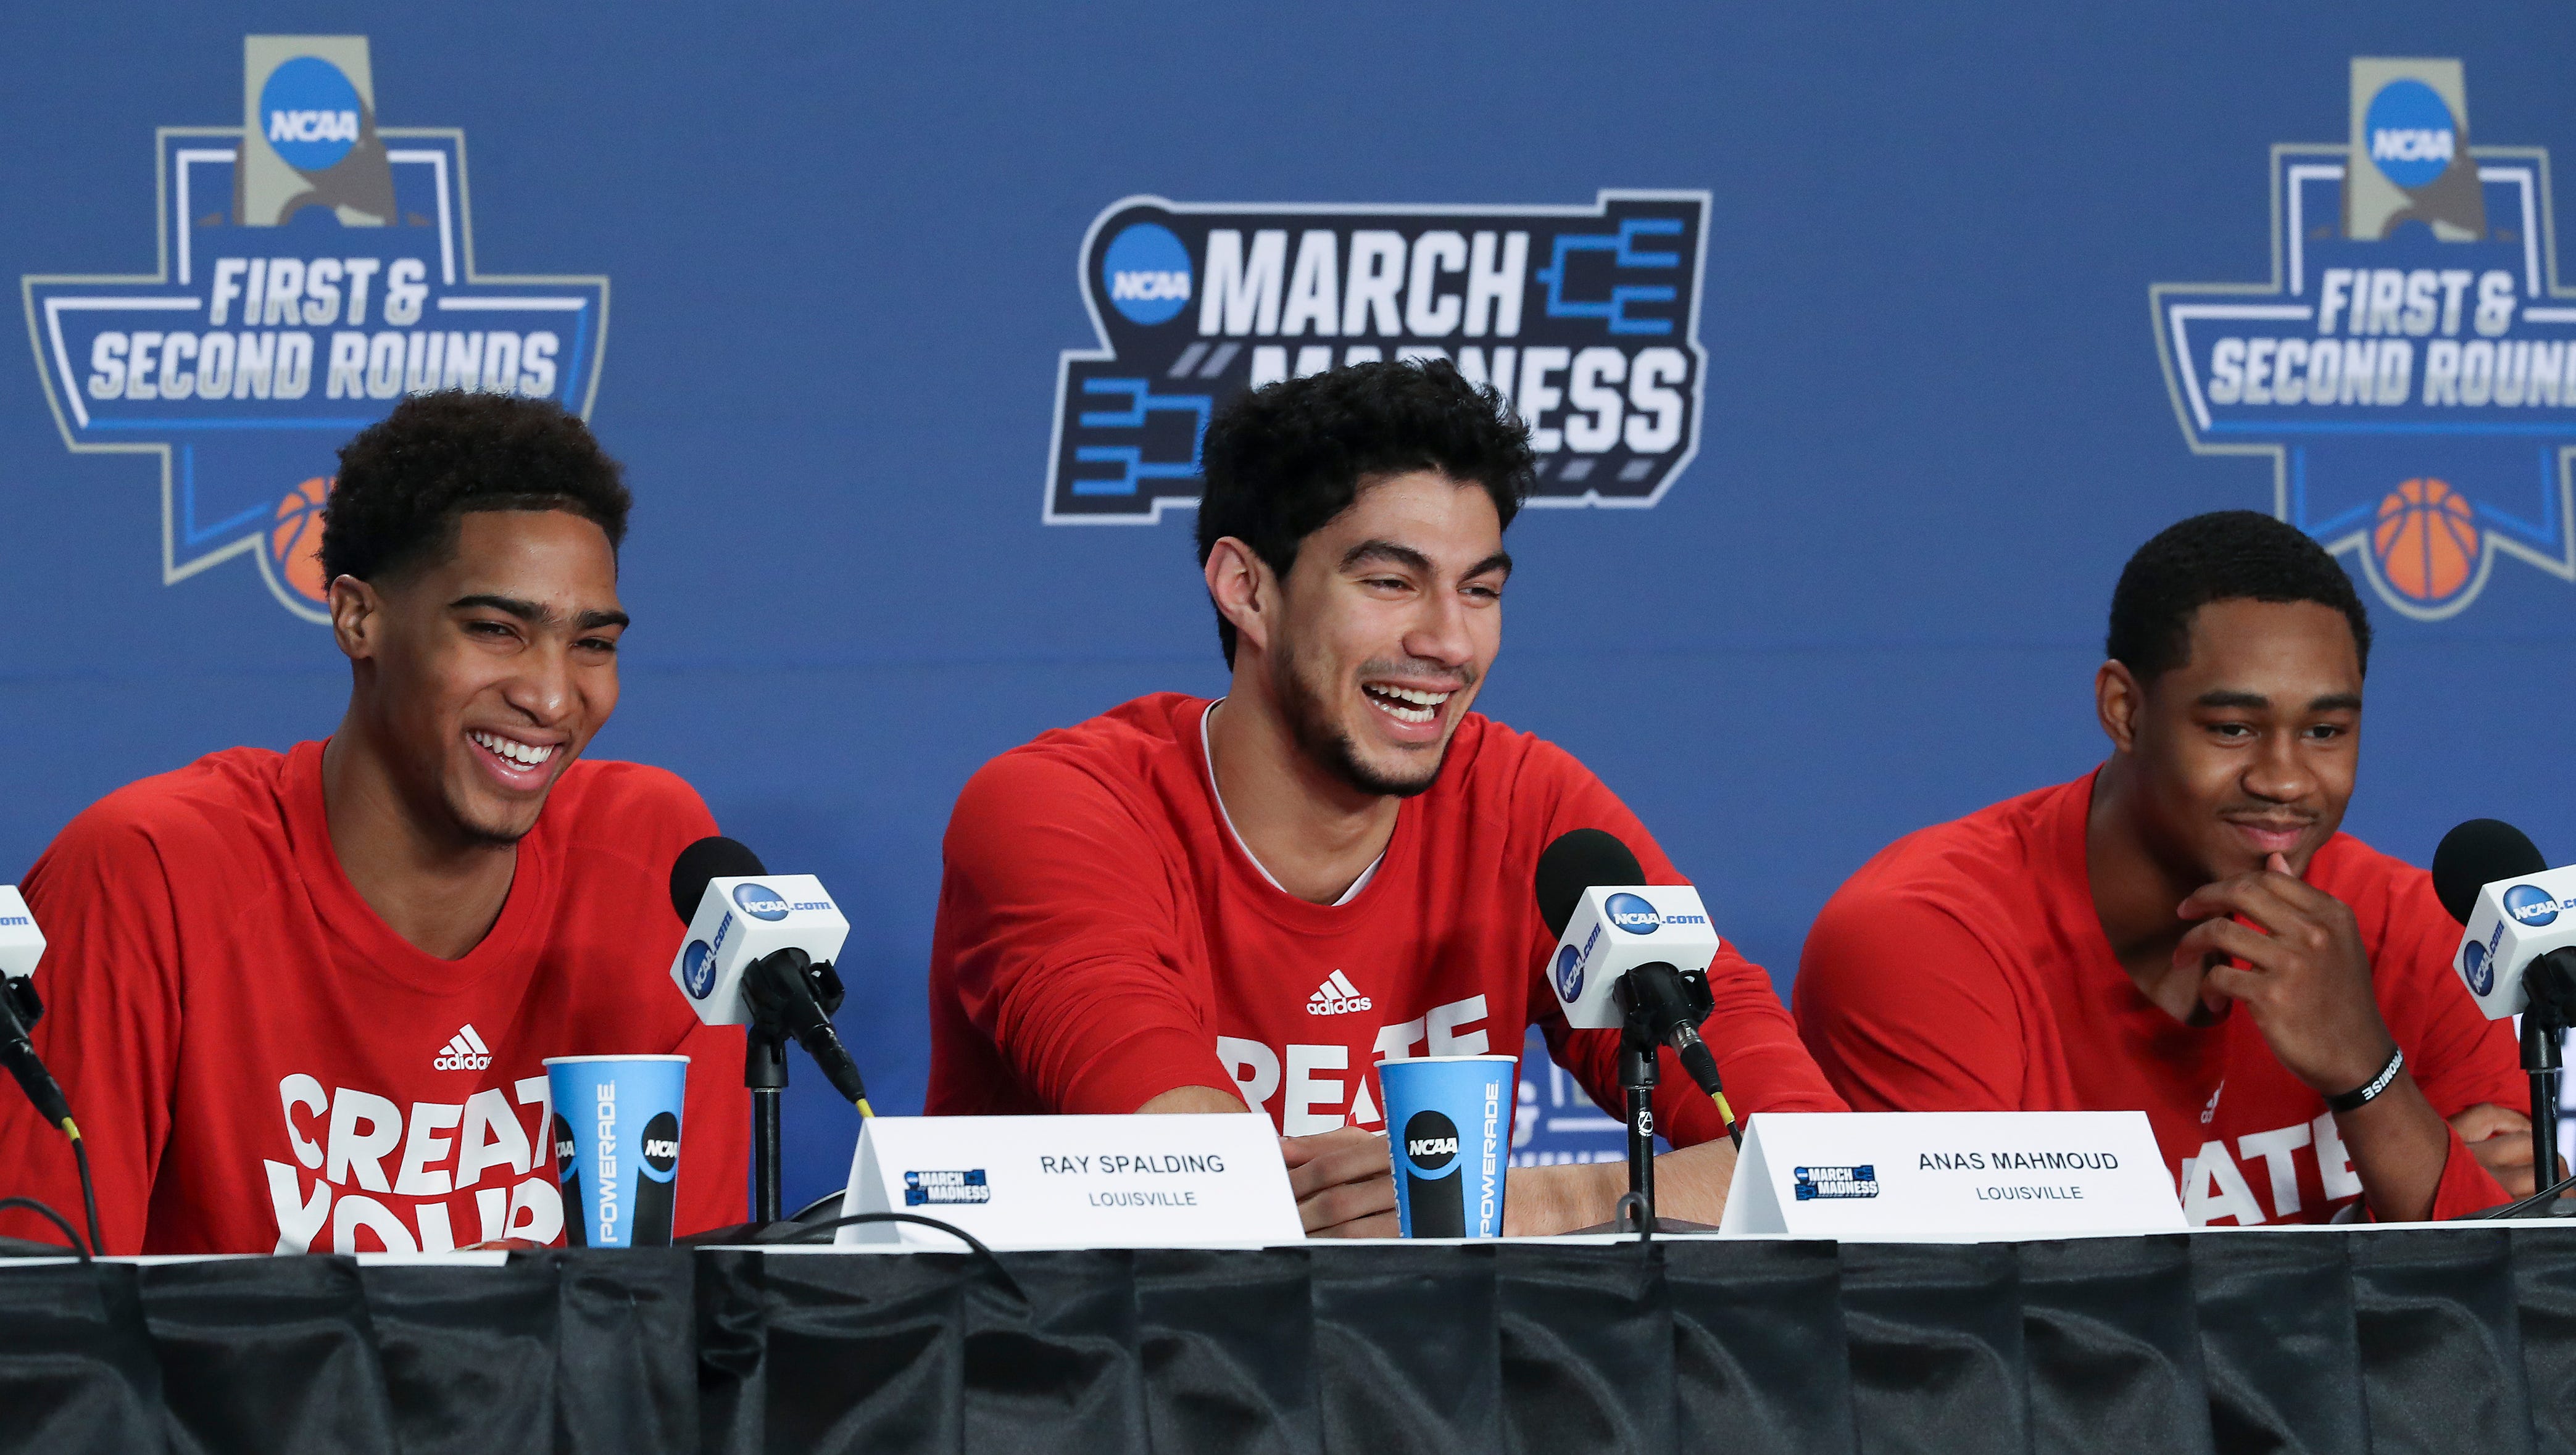 Louisville basketball | How Mahmoud, Spalding at Nations